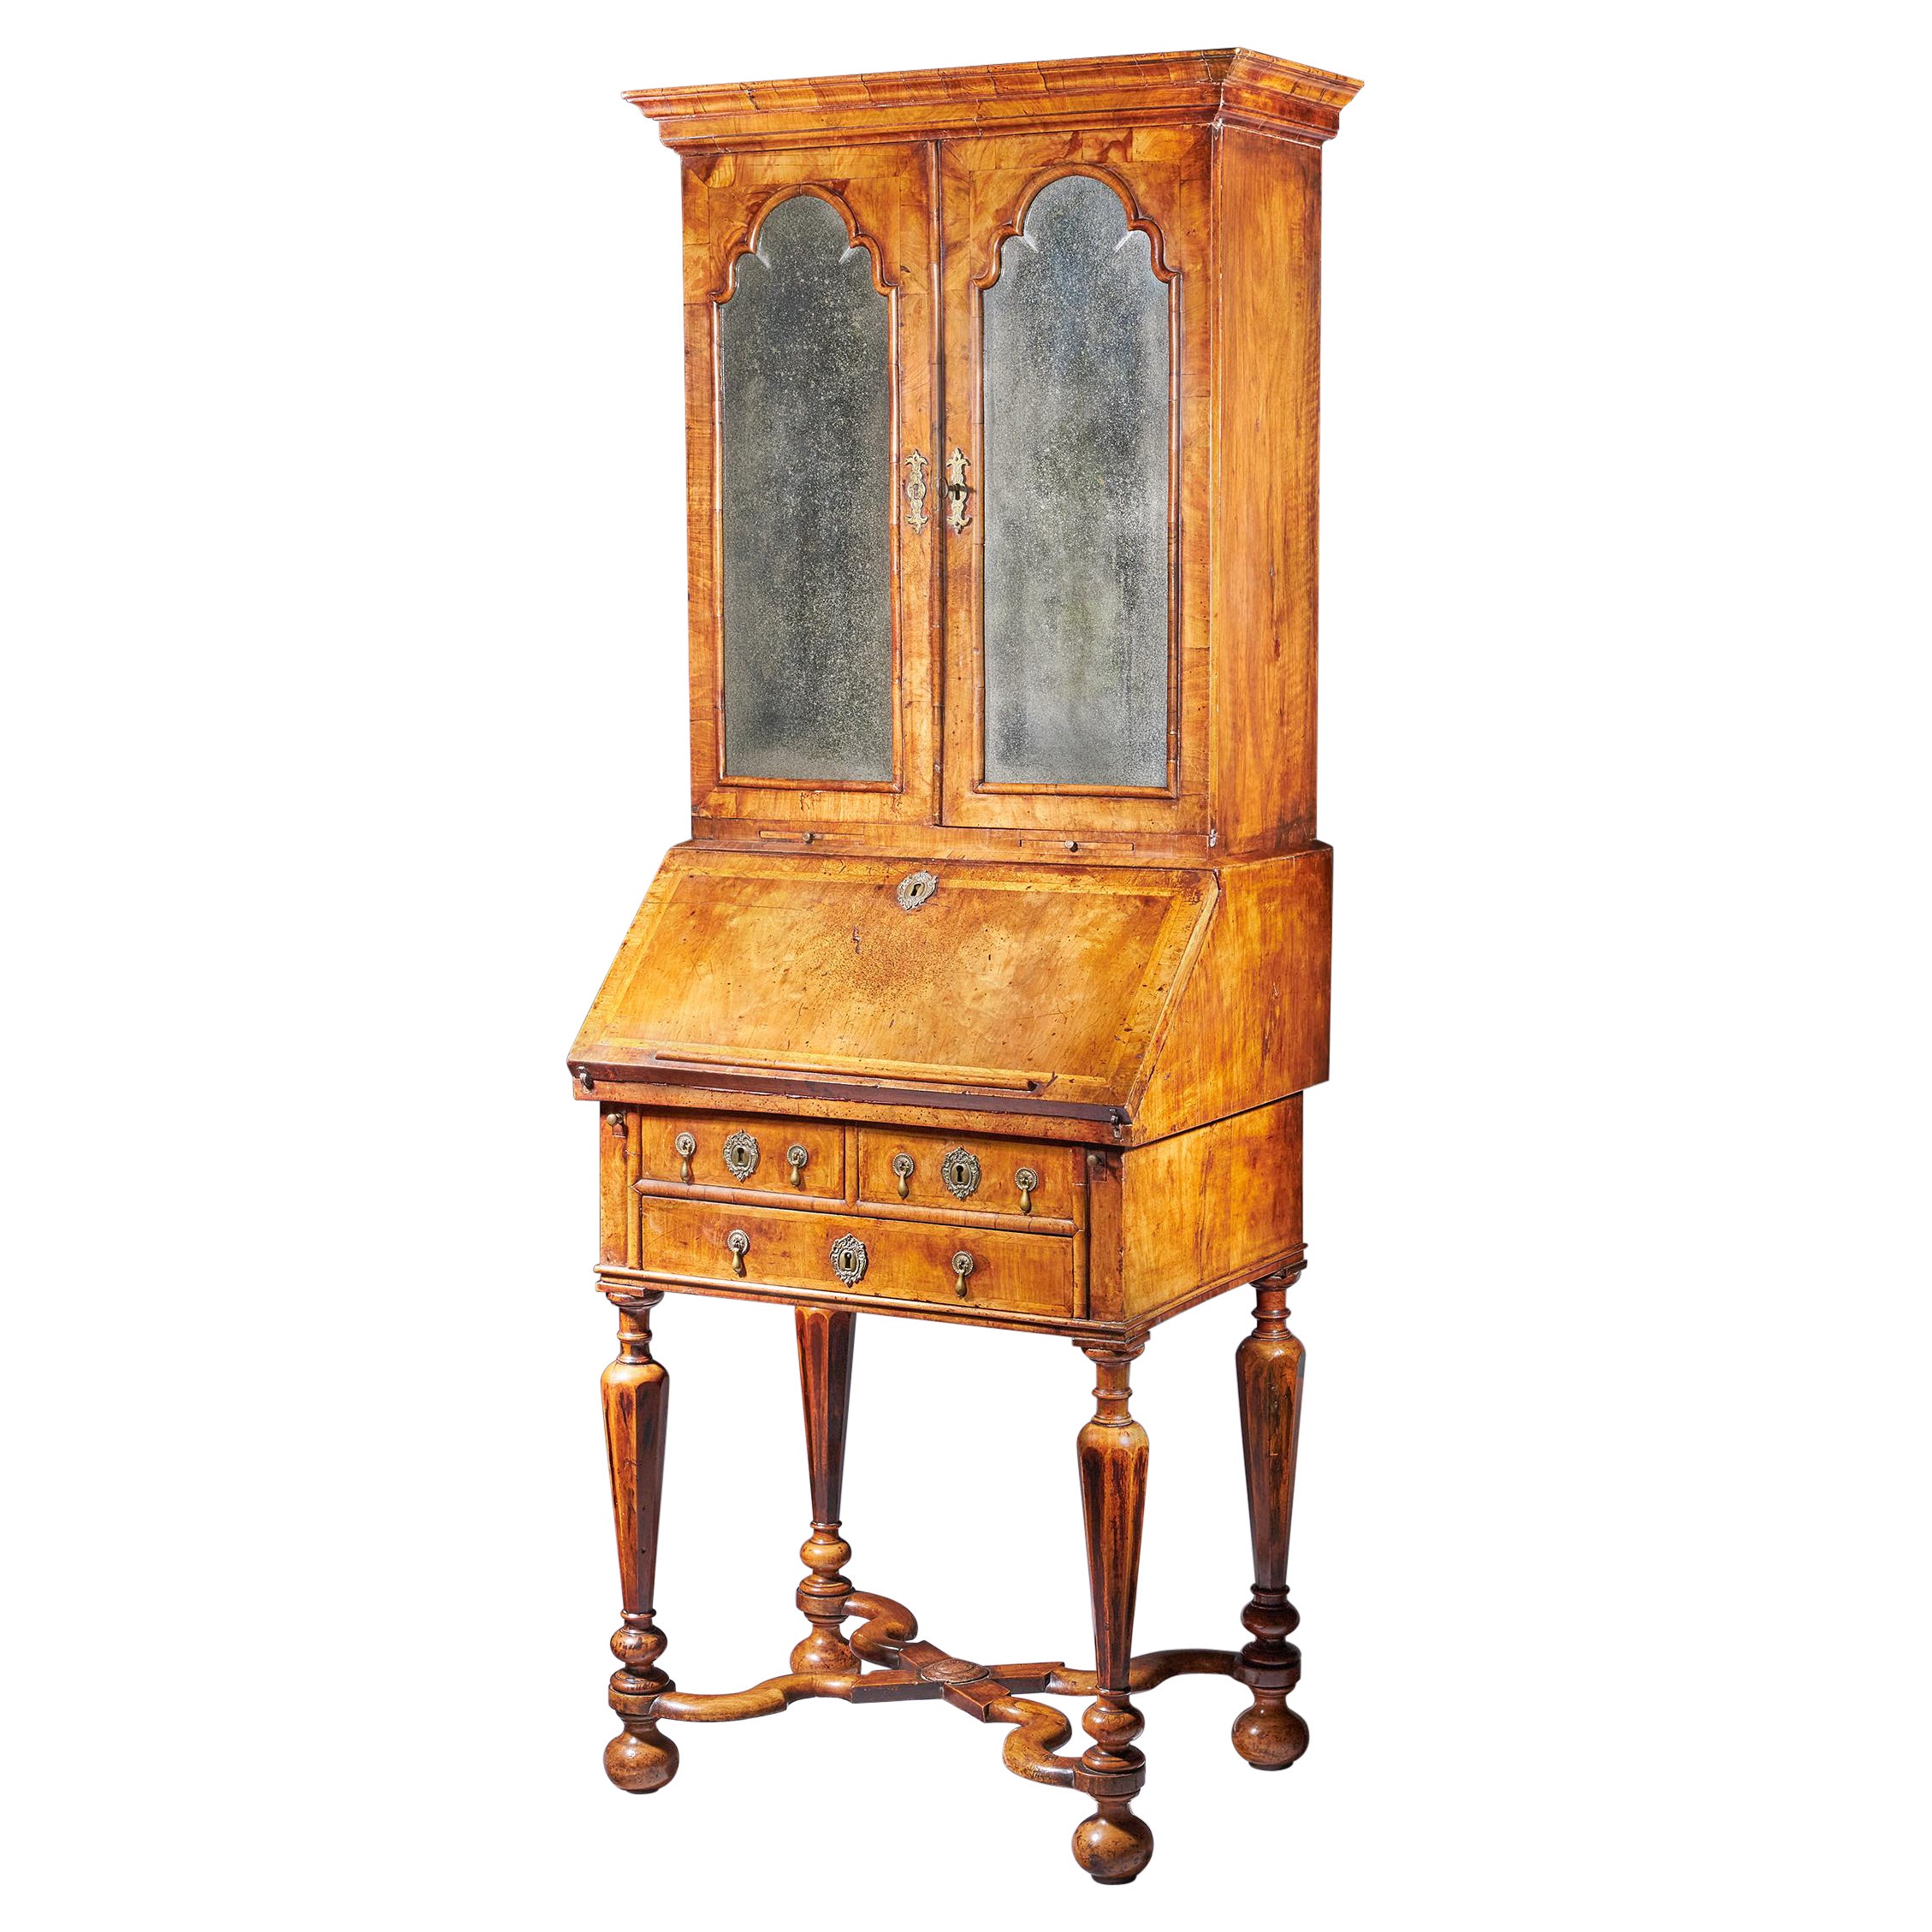 An exceptionally rare William and Mary period walnut writing bureau and bookcase on stand of diminutive small proportions, C. 1695 England. 

The ogee cross-grain moulded cornice above a pair of hinged doors with shaped softly bevelled mirror